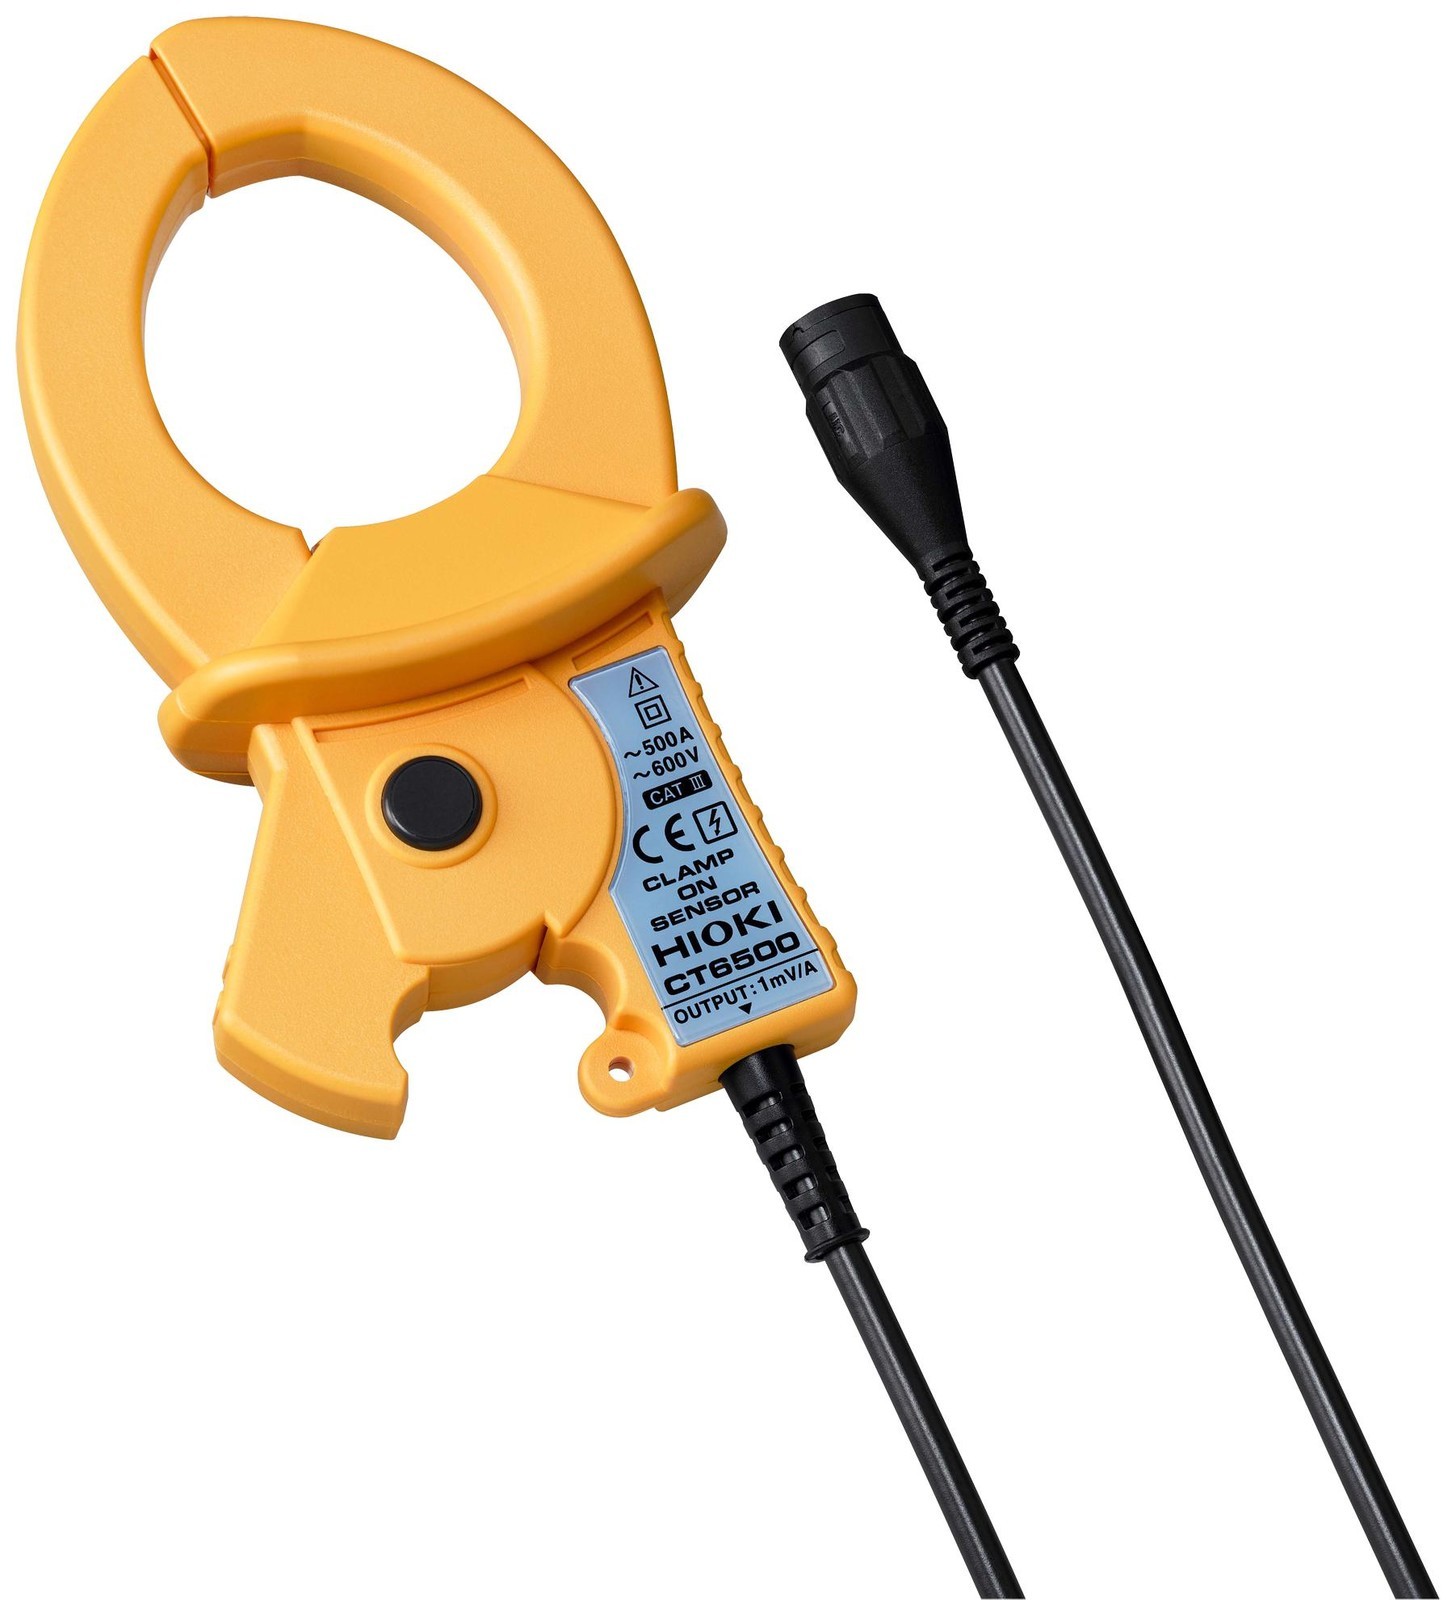 Hioki Ct6500 Current Probe, 50 To 500A, Clamp Logger